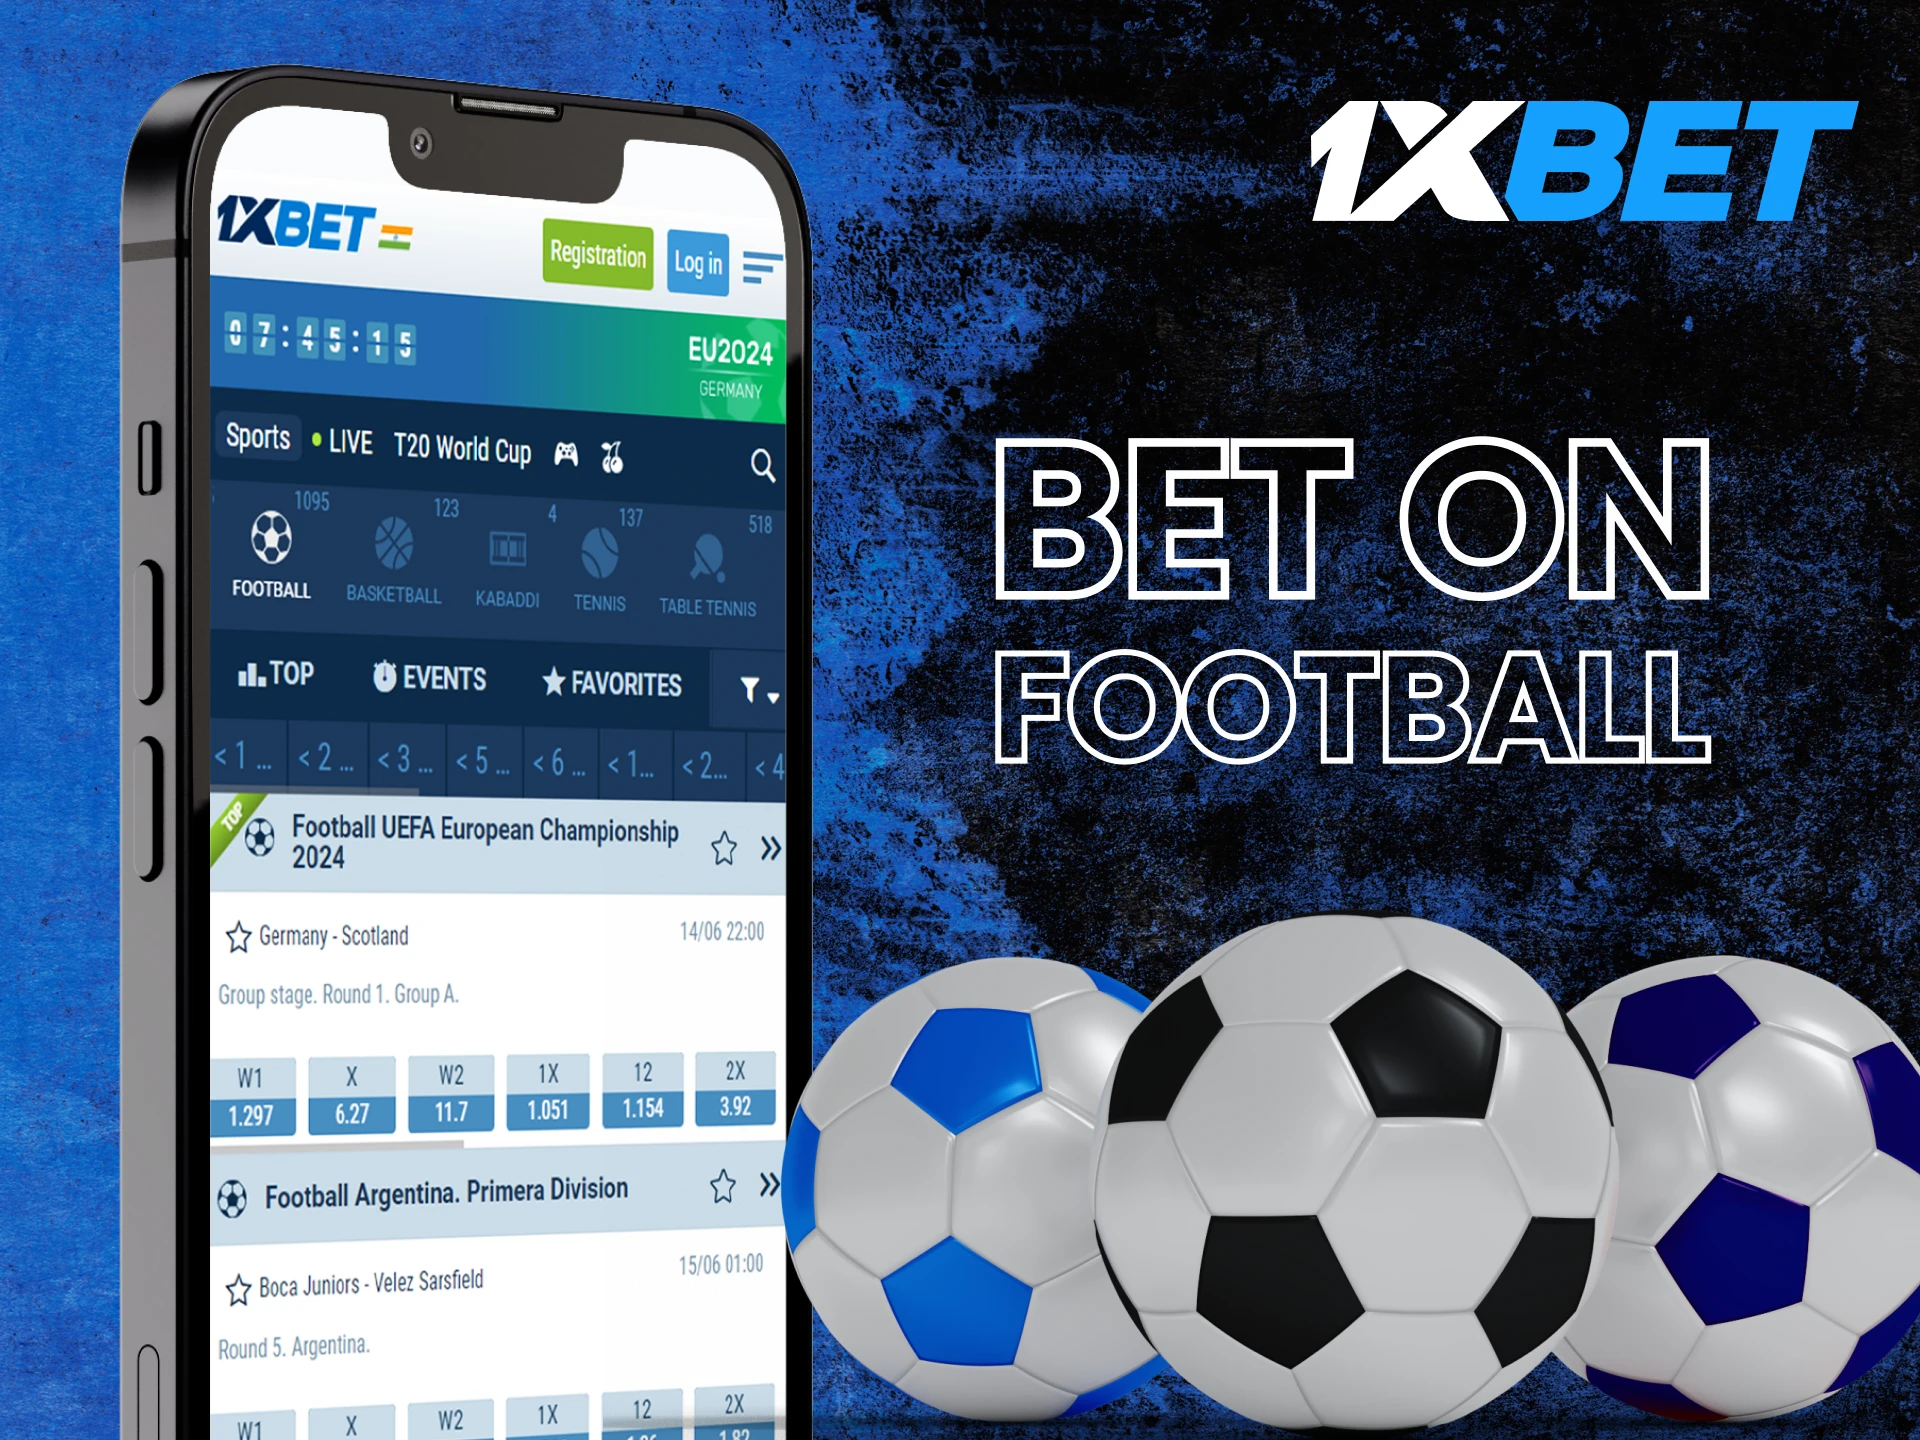 1xBet has a mobile football betting app for Android and iOS devices.